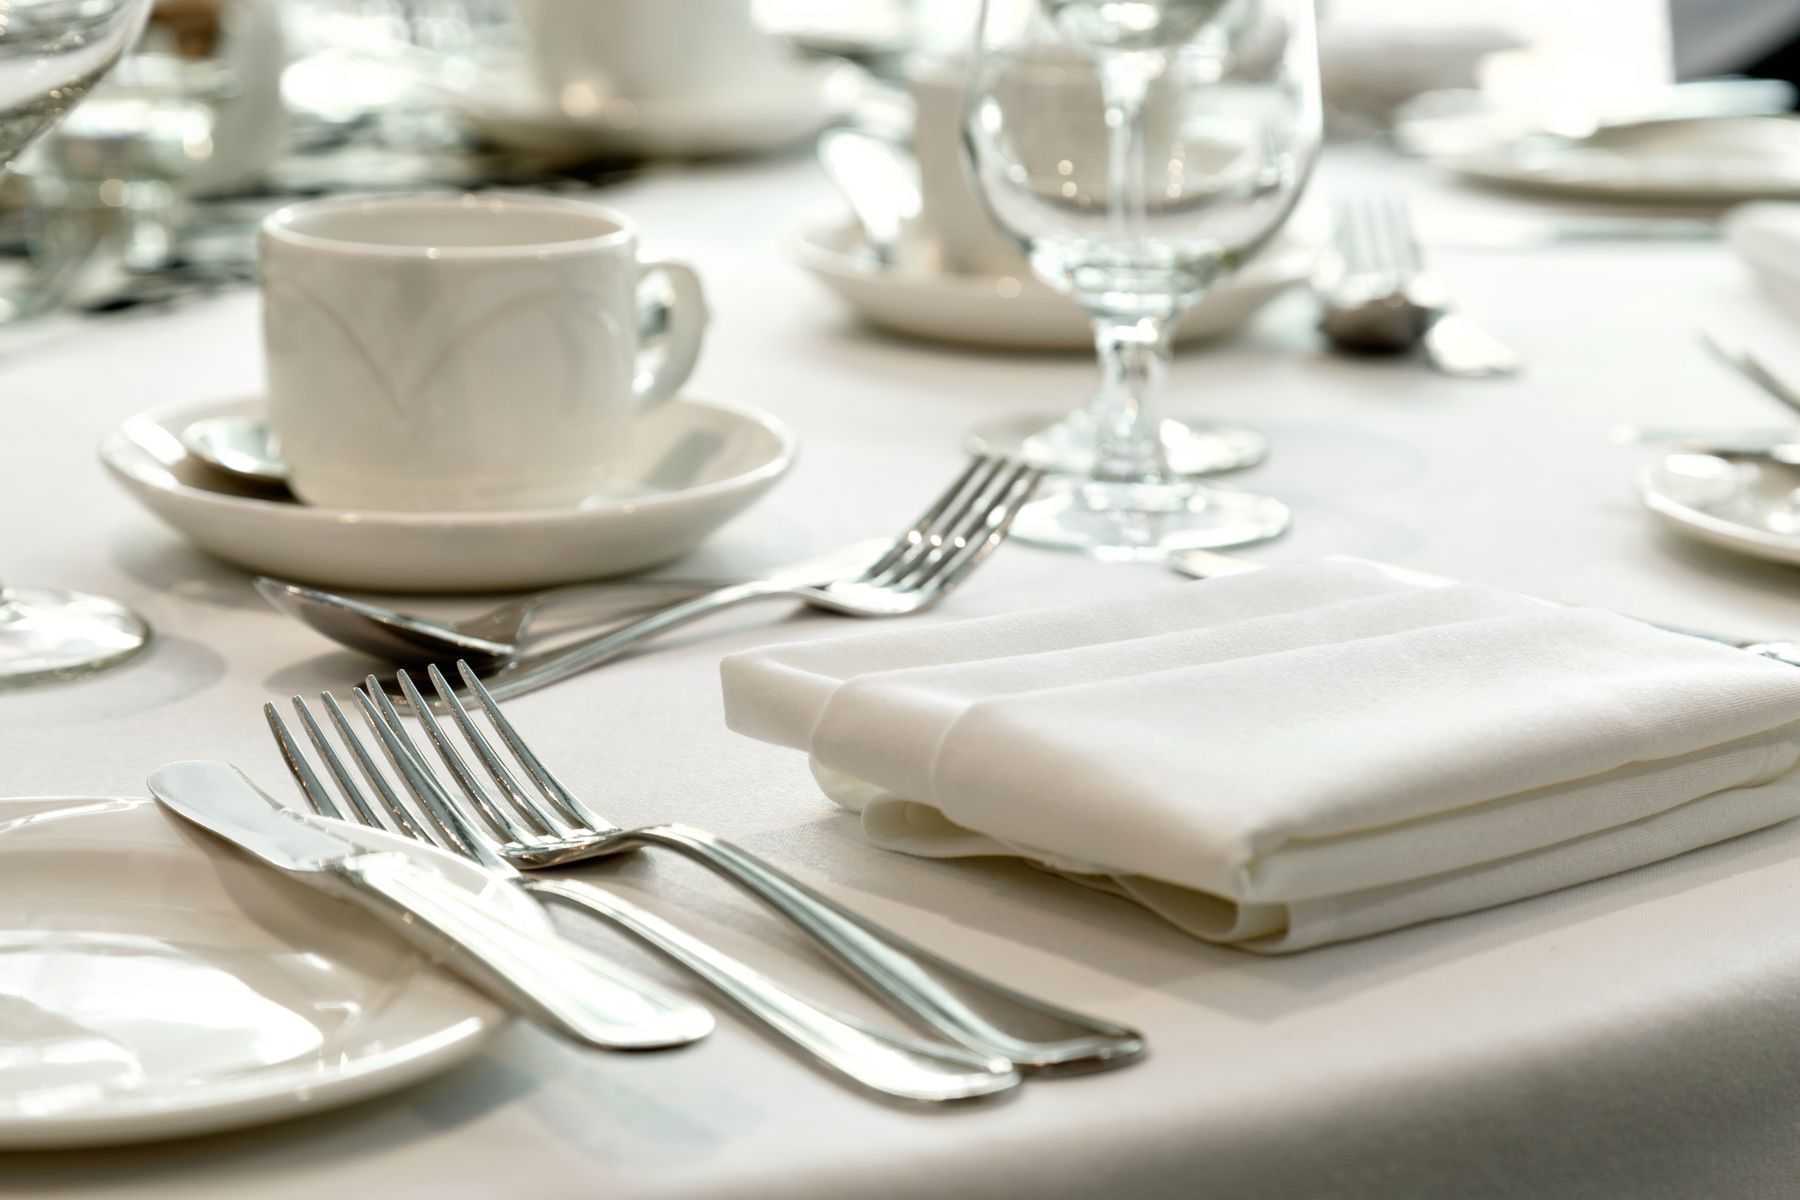 Silverware and drinkware on table